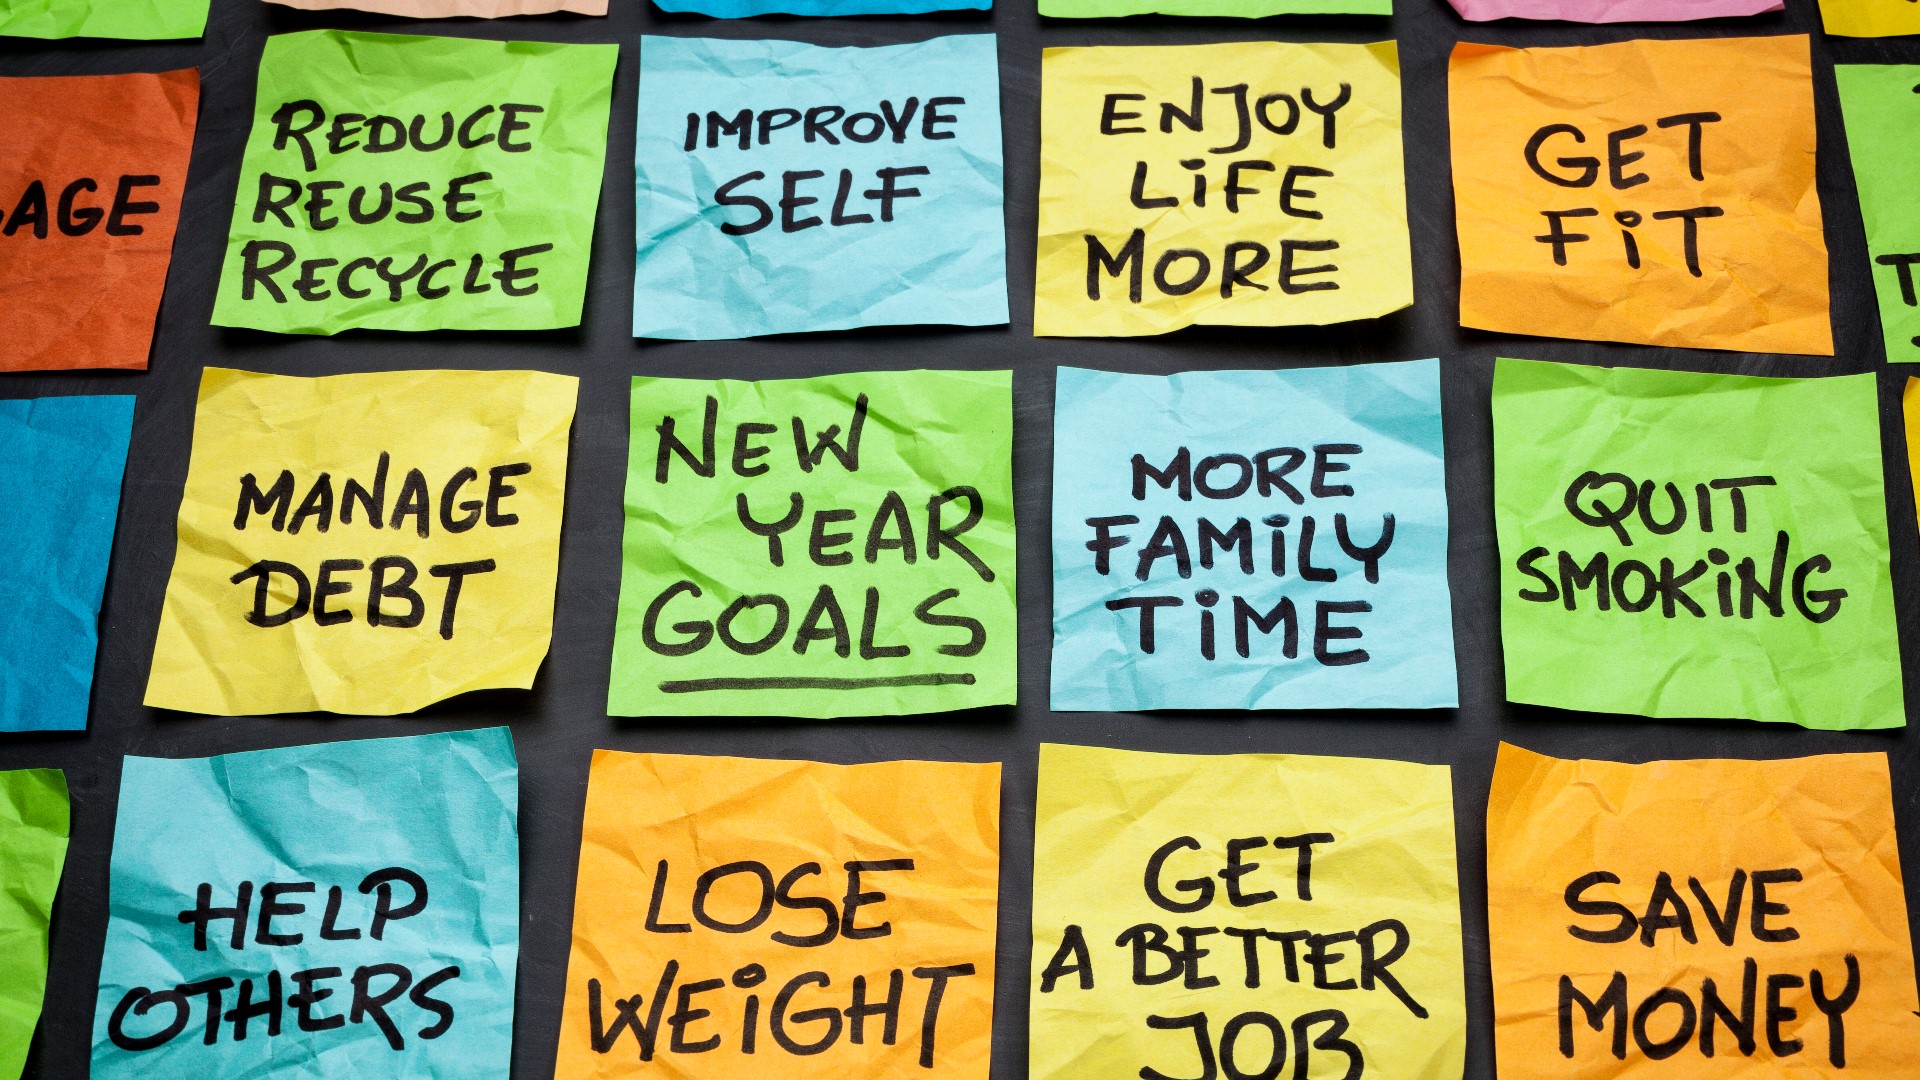 So many people are looking forward to the start of a 2021. We talked to Chief Habit Scientist Tamsin Astor about how to make resolutions and stick to them.